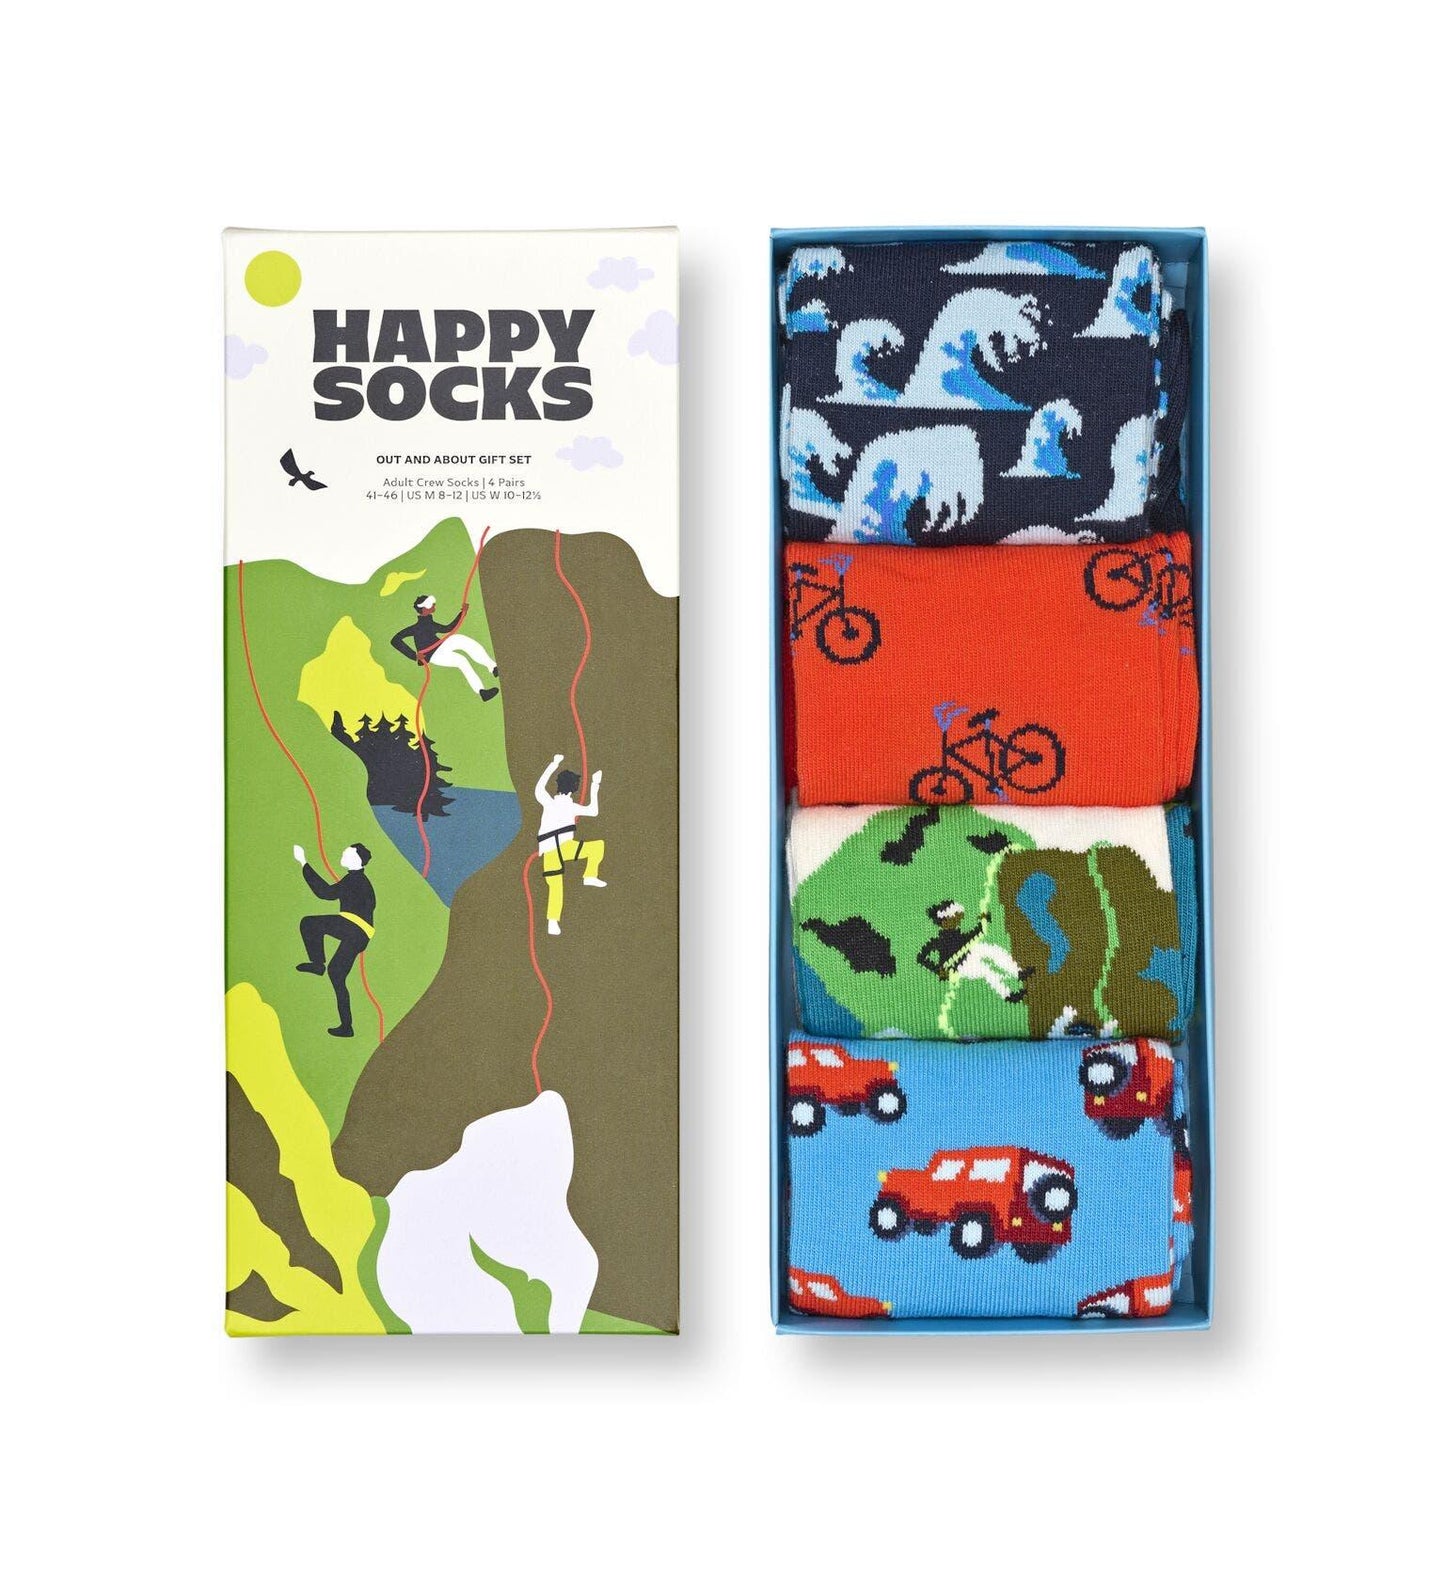 Happy Socks 4-Pack Out And About Socks Gift Set - No Generation